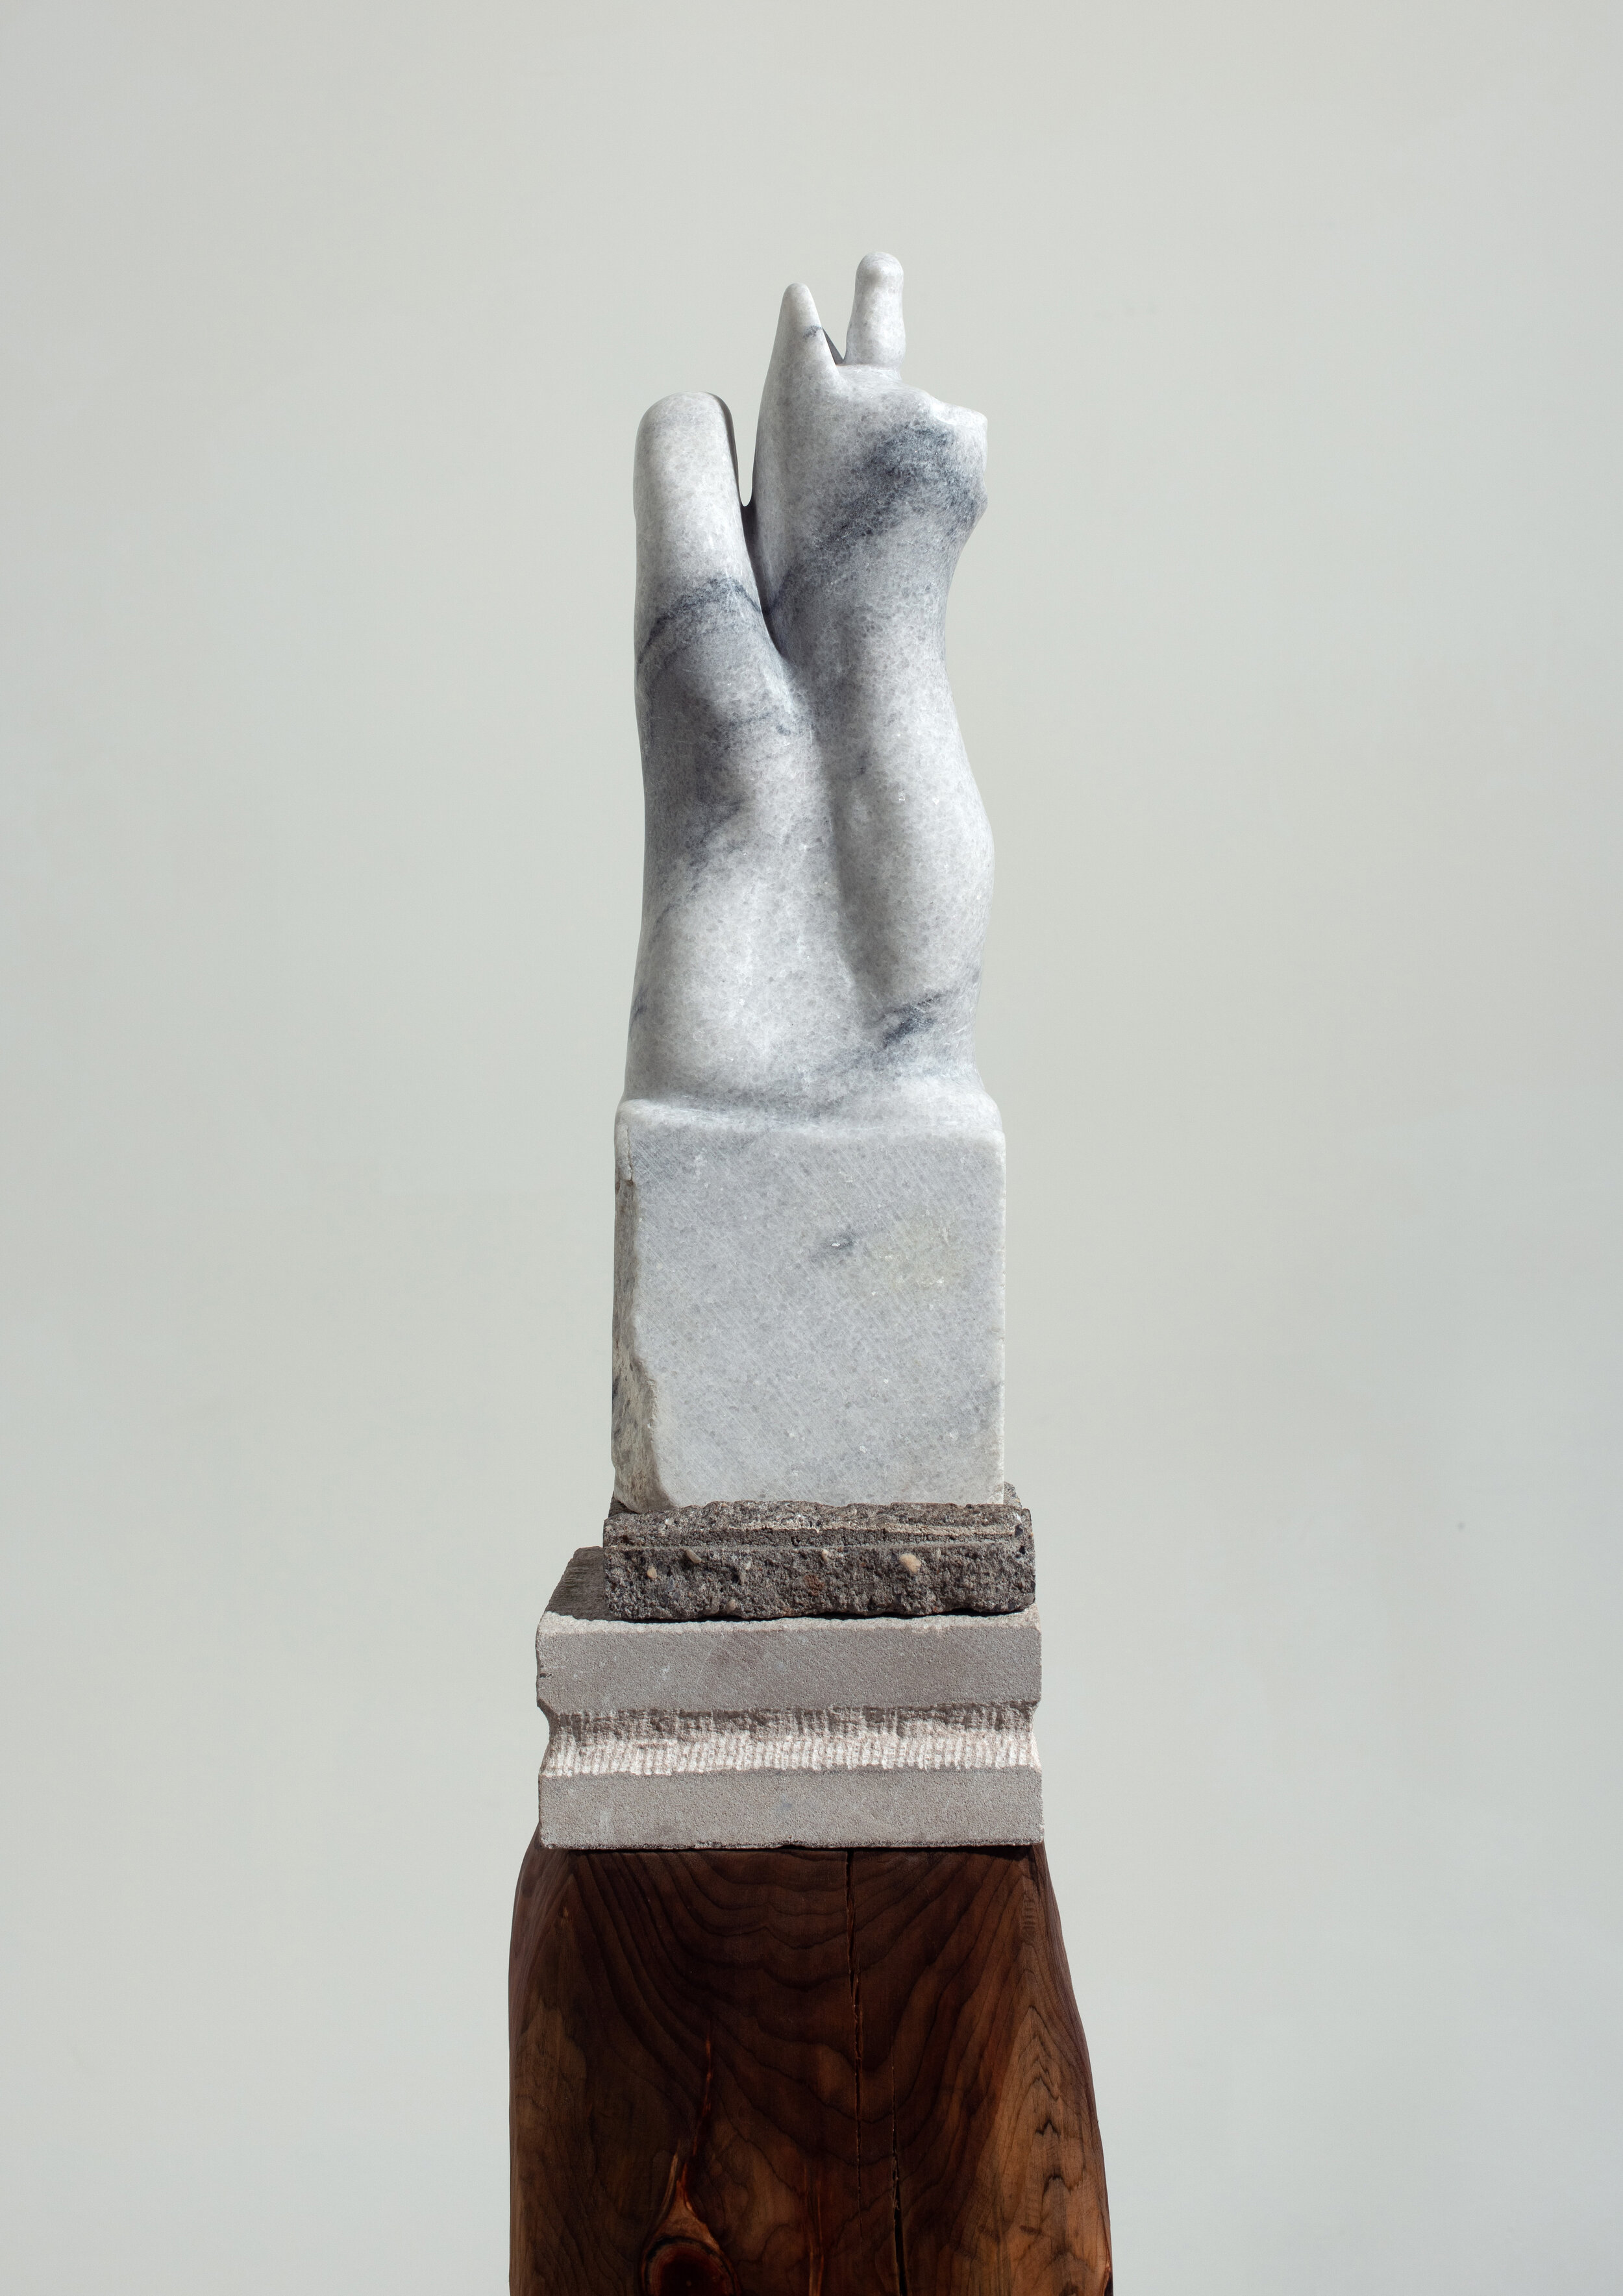   Singing Cat  (detail), 2020 Wood, marble, limestone, and concrete 63 1/2 x 10 x 10 inches 